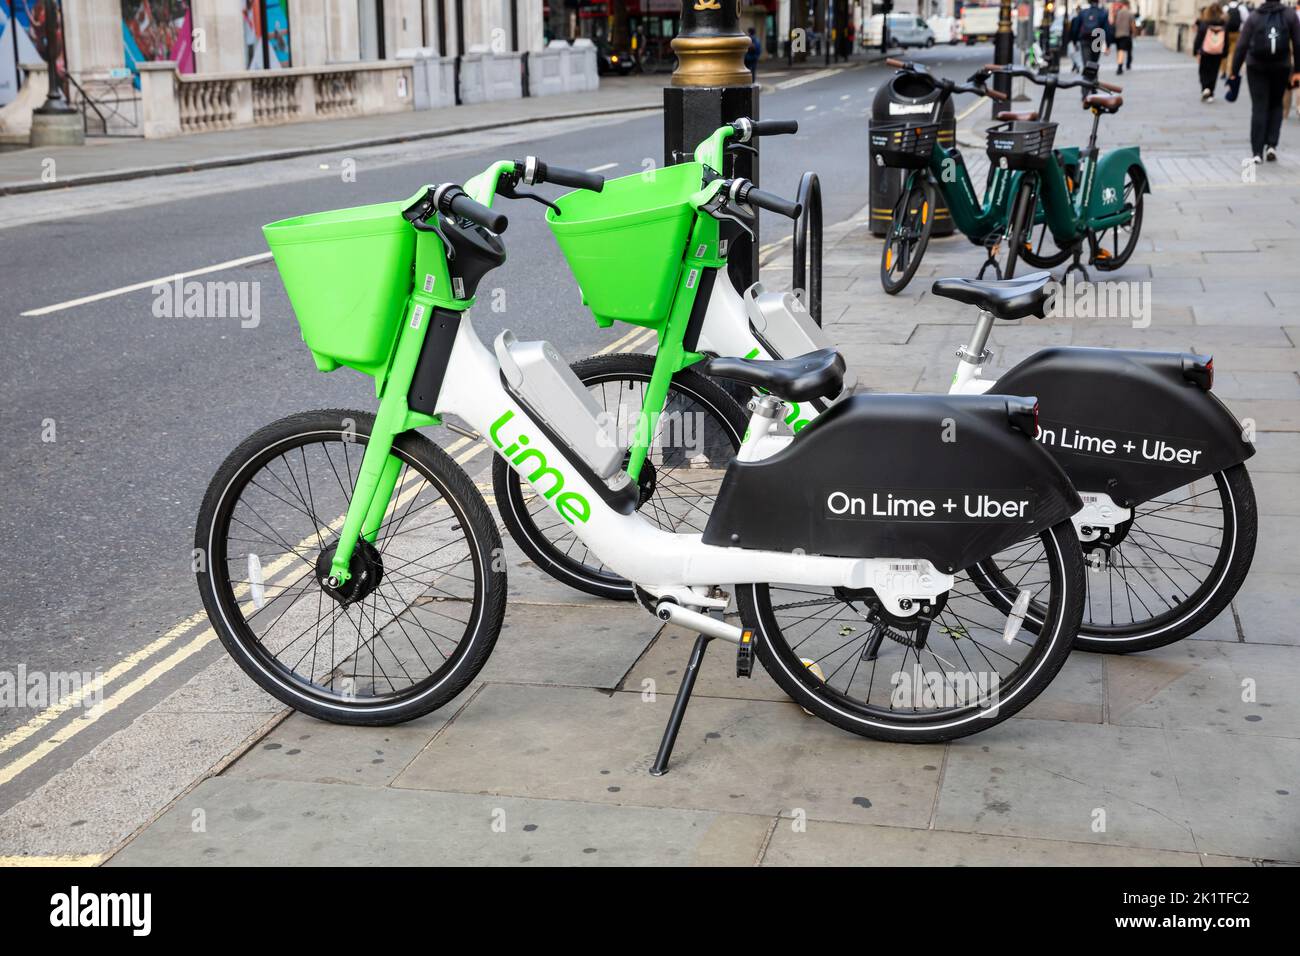 Electric Bikes for hire Early Morning in London Stock Photo